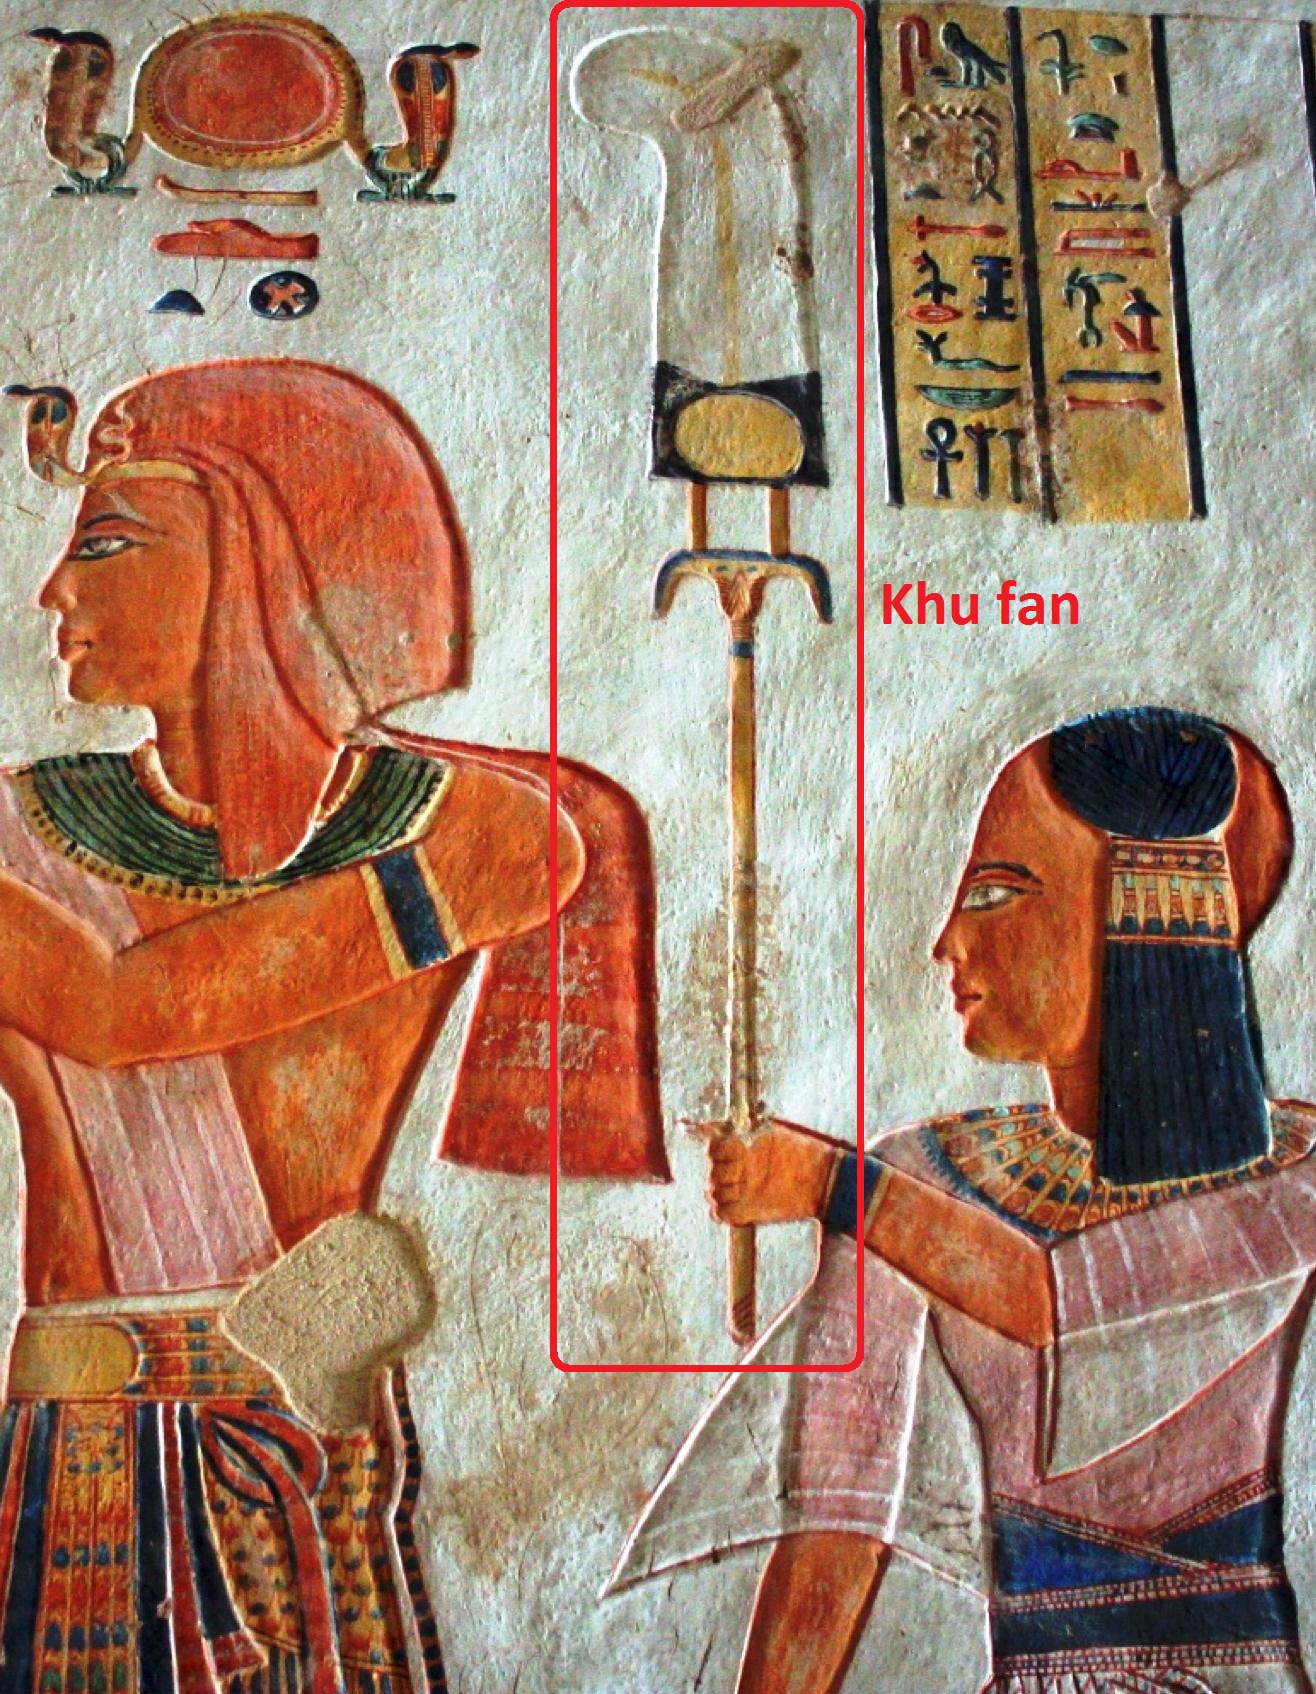 Variable of the Day, Ancient Egypt: Khu fan